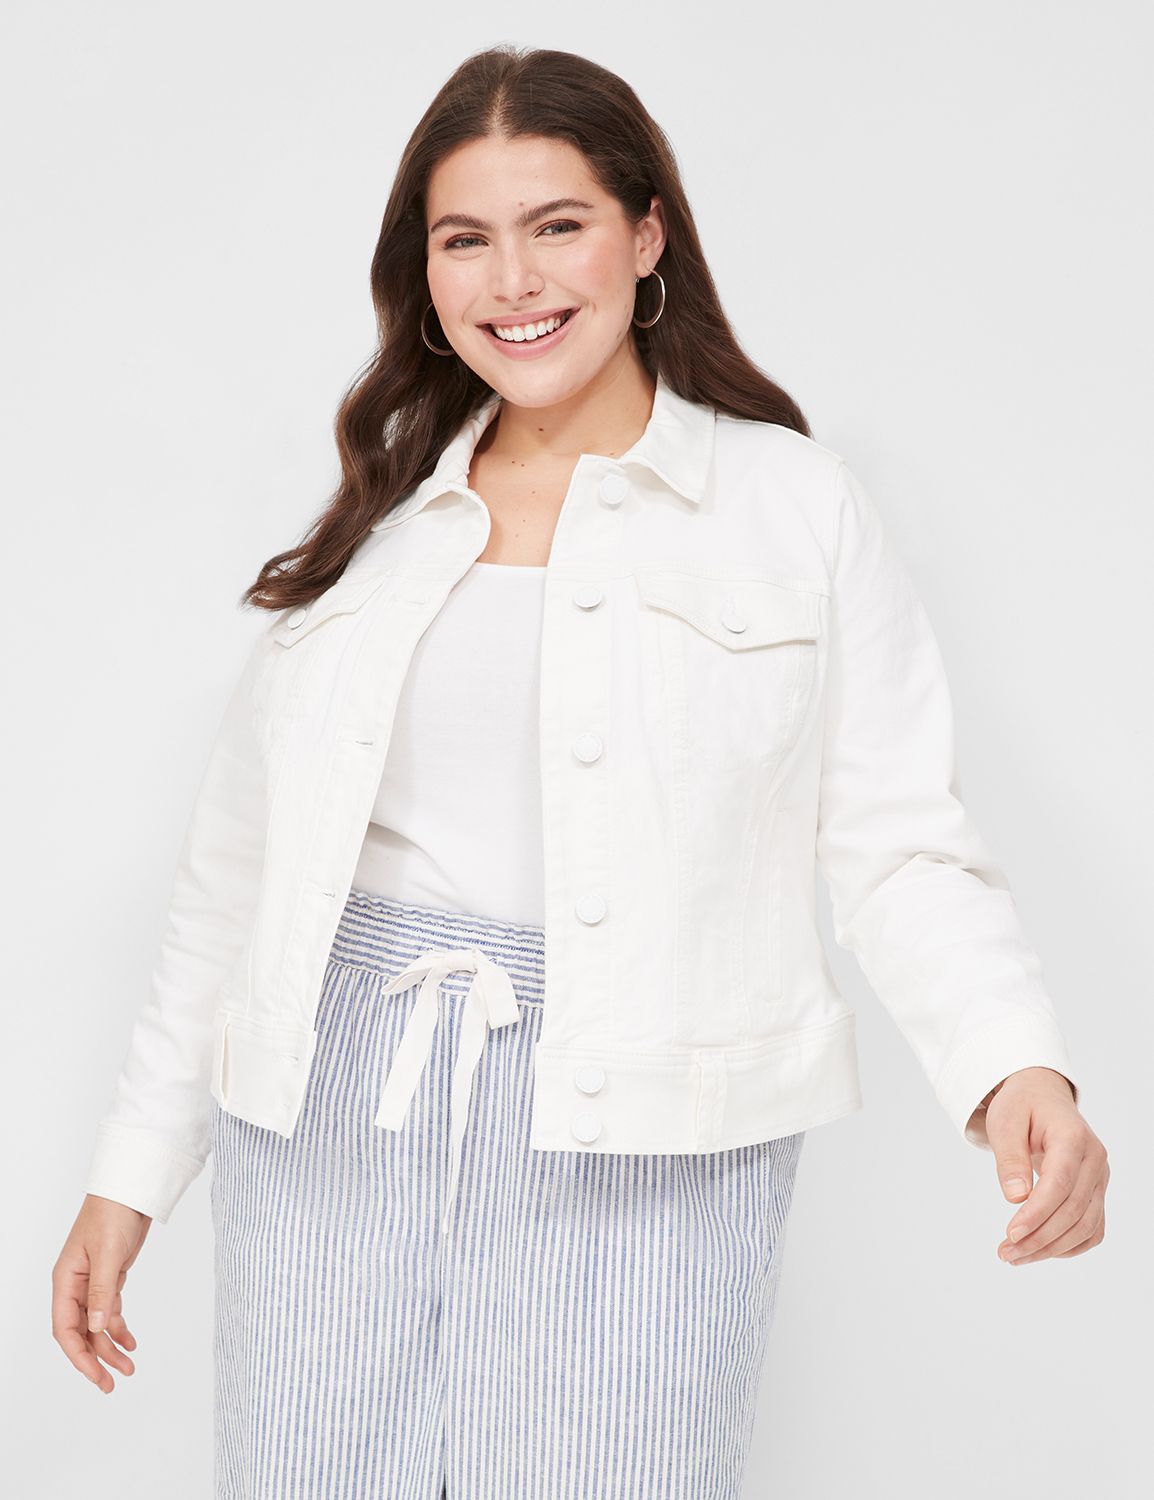 Lane Bryant - Kicking off this V-Day weekend with $35 full-price